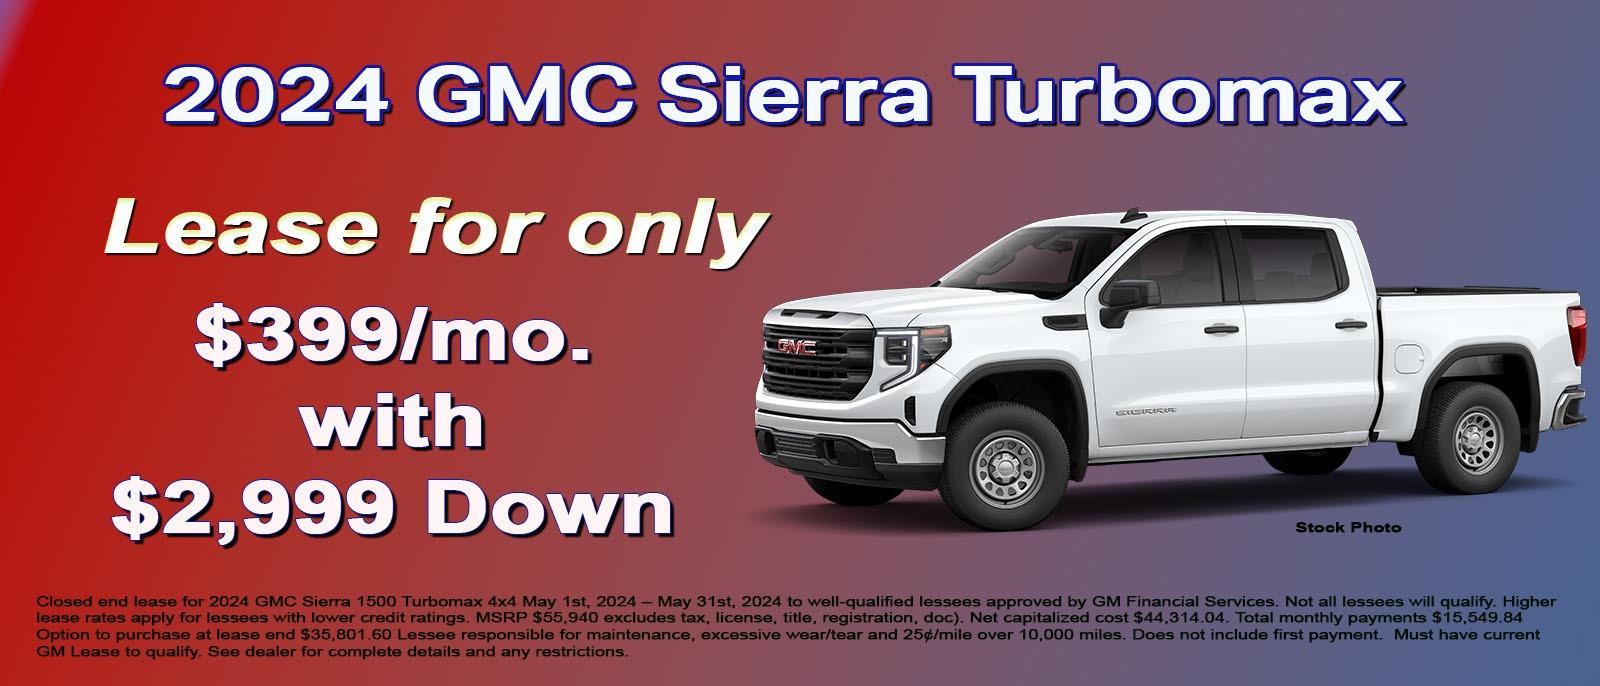 Lease your new GMC Sierra for only $399